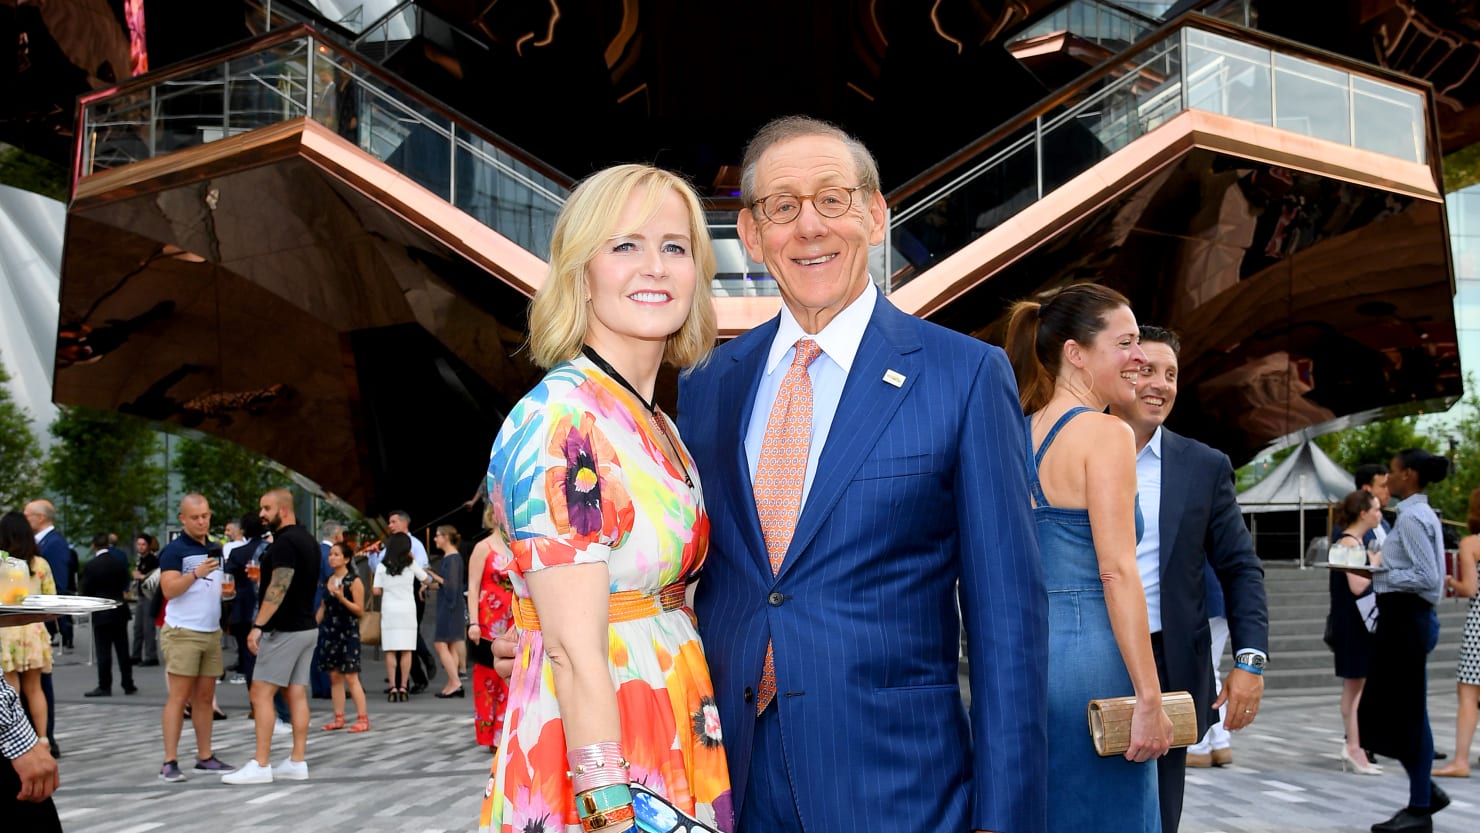 Profile on Miami Dolphins billionaire owner Stephen Ross